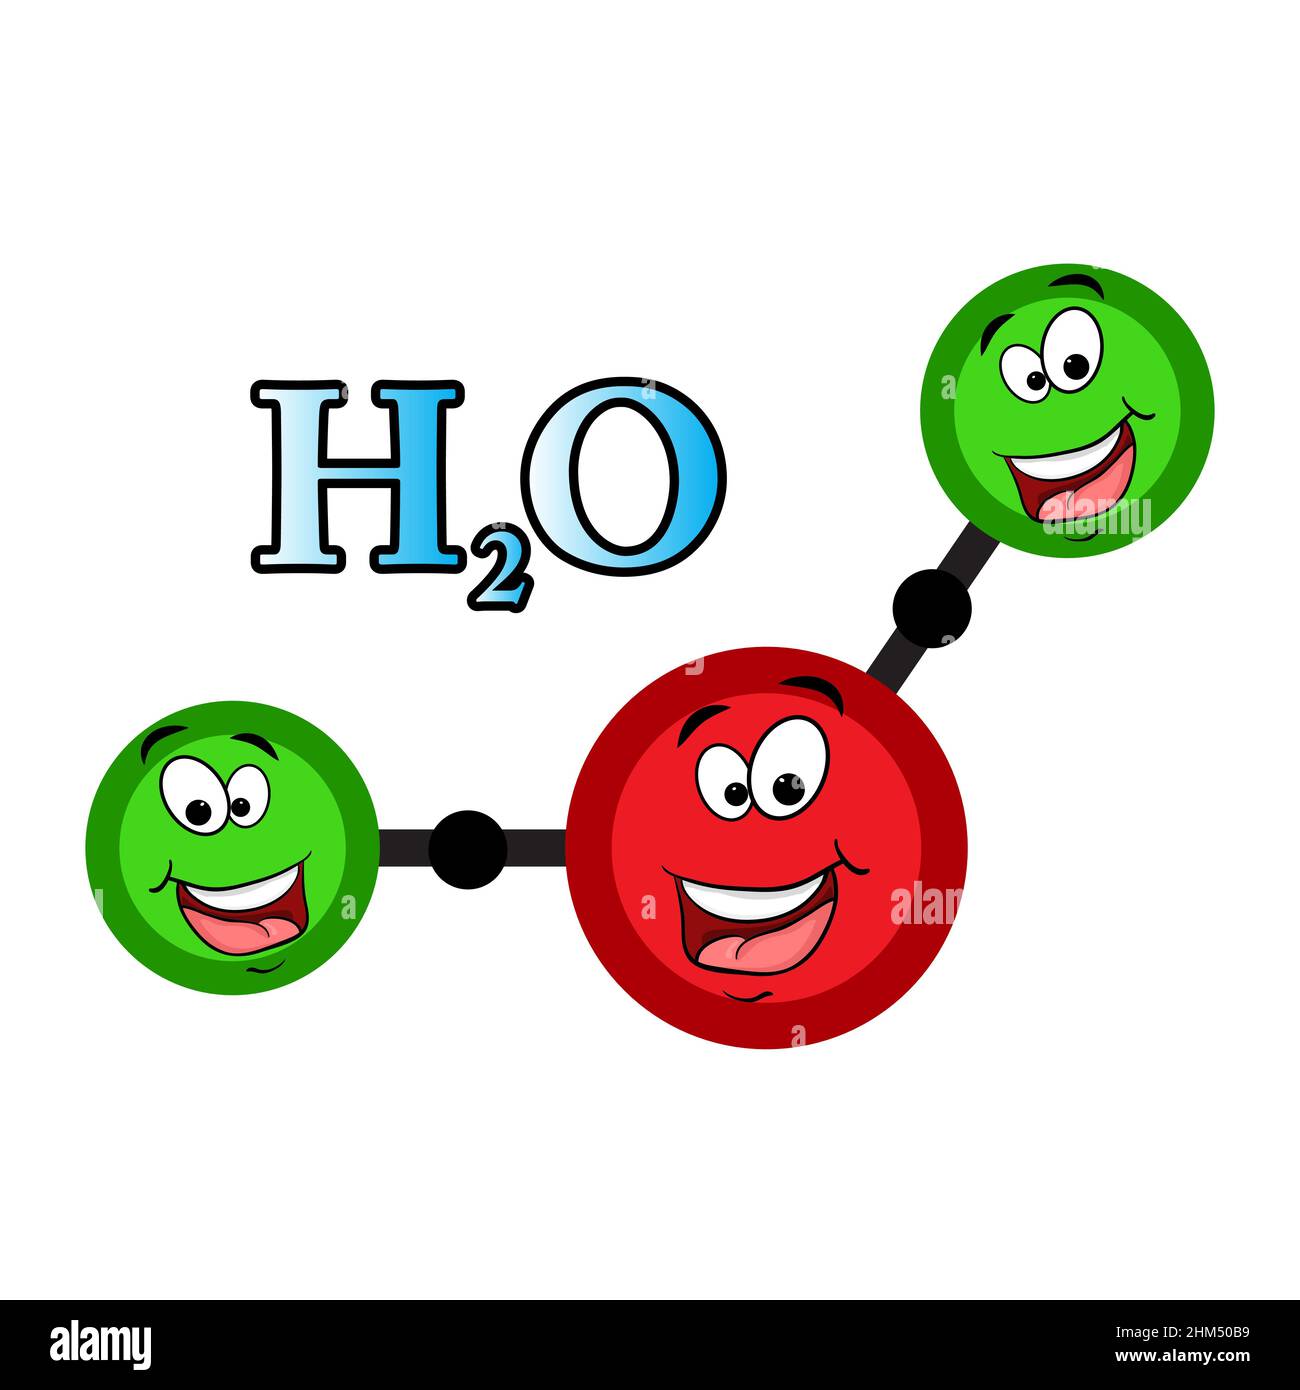 h2o character water molecule structure. Liquid aqua atom formula with eyes and smile. Vector illustration isolated on white background. Stock Vector